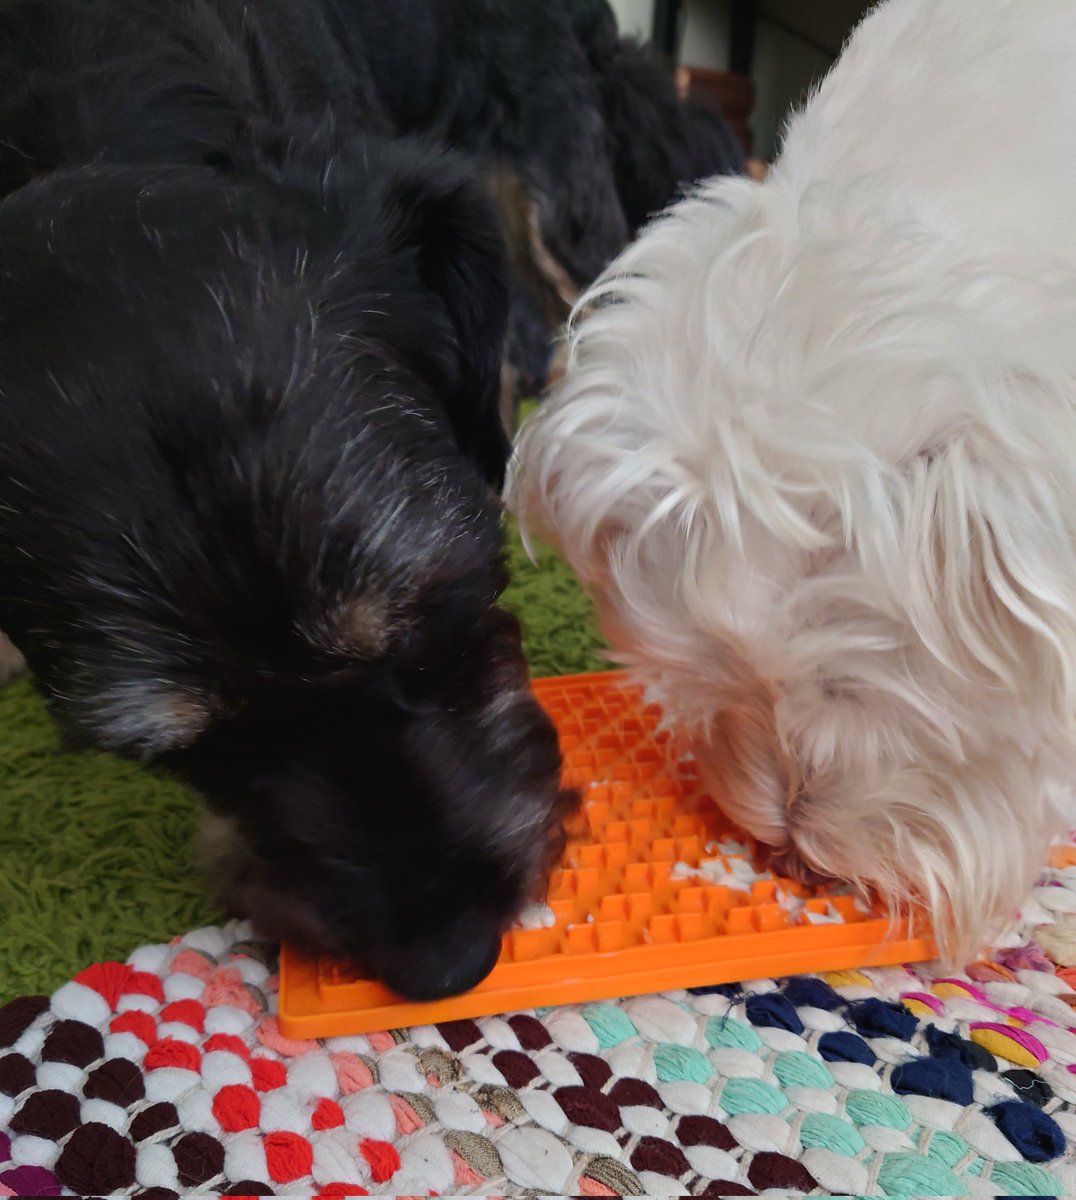 Sharing our Lickimat like good boys... it keeps us out of trouble for a while! 🐶🤗 Today's delicacy is cream cheese 😋 #yum #brothers #dogsoftwitter